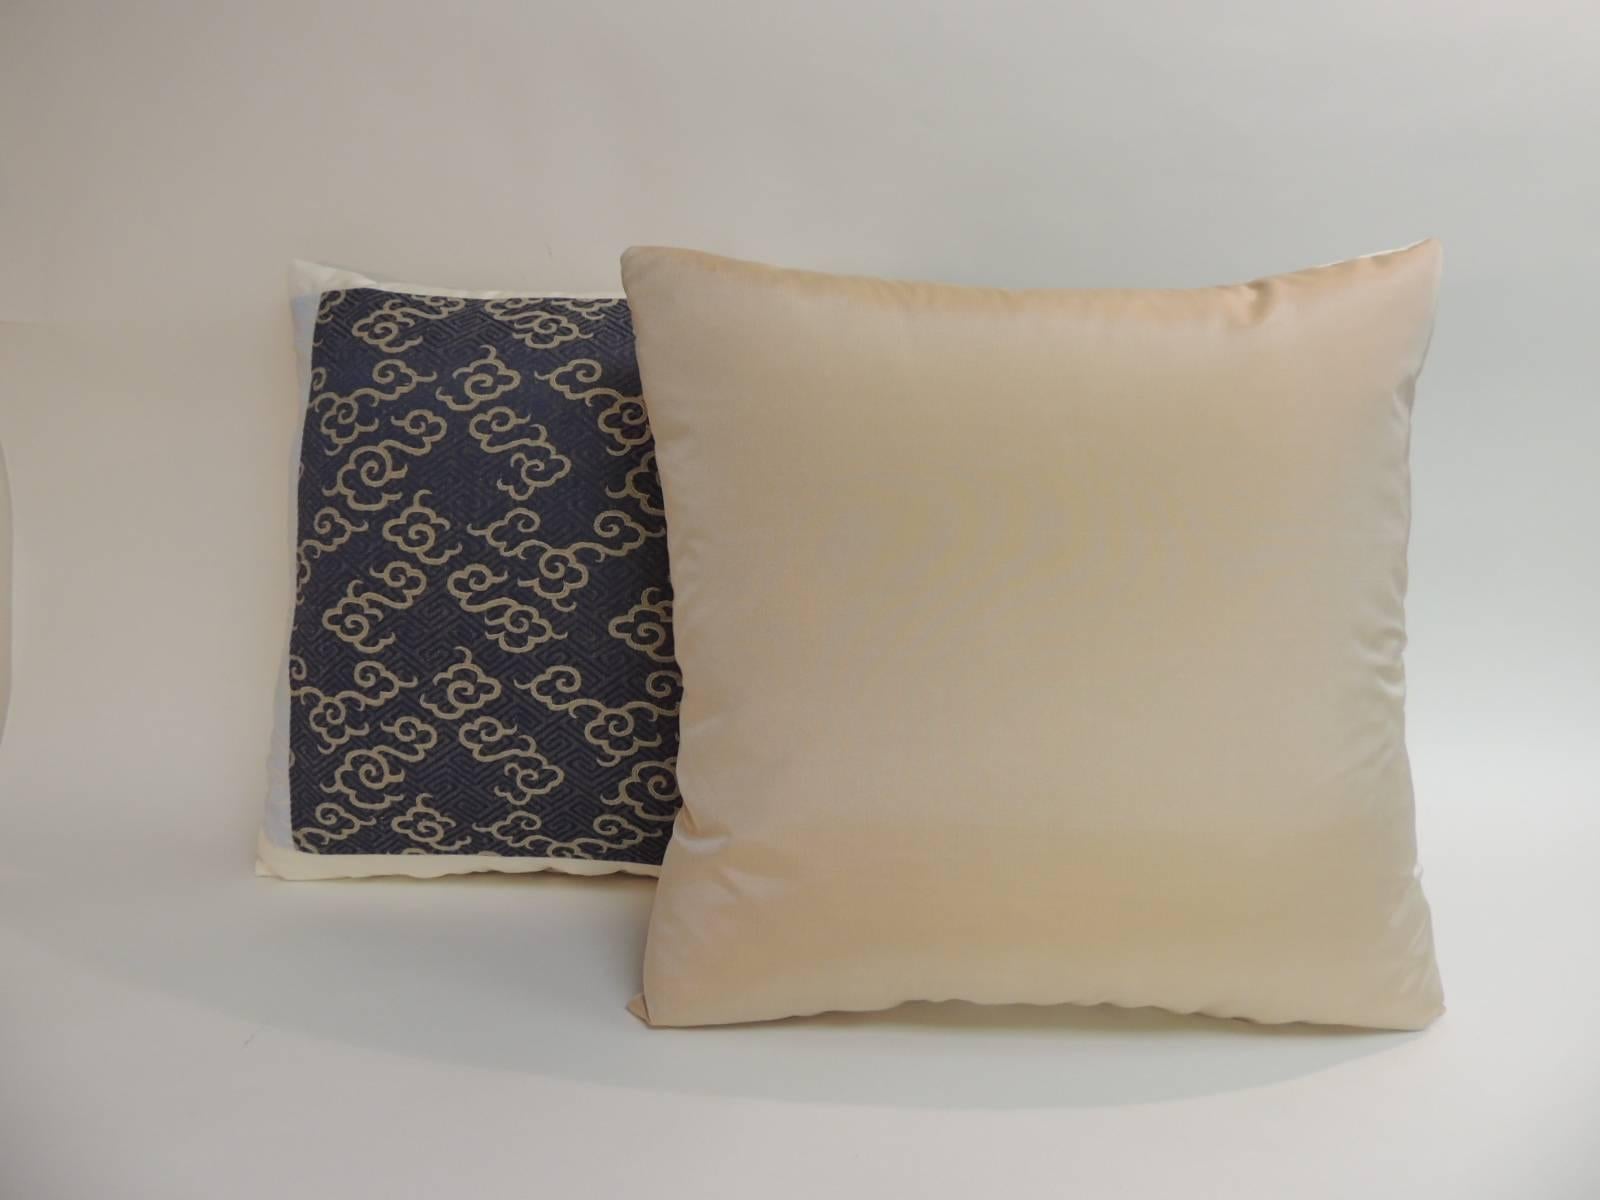 Late 20th Century Pair of Vintage Blue and Gold Japanese Obi Clouds Embroidery Decorative Pillows